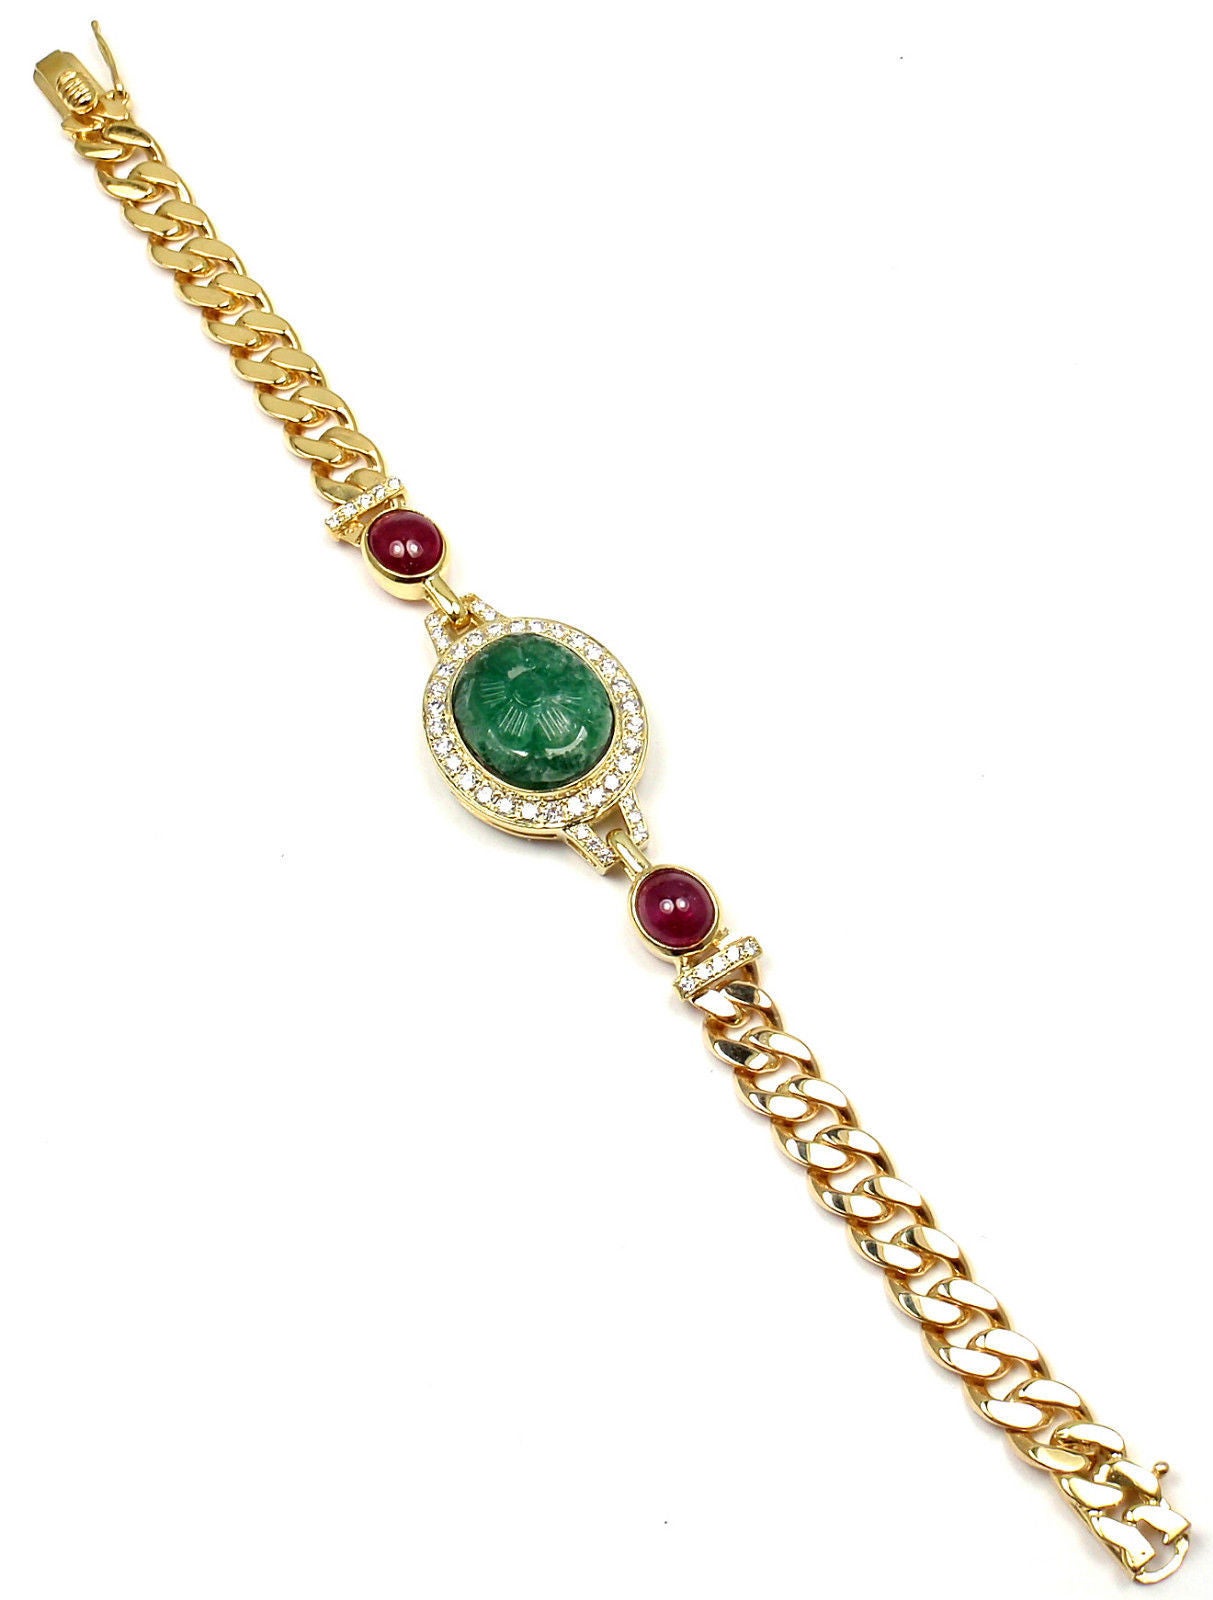 18k Yellow Gold Diamond, Carved Emerald & Ruby Bracelet by Van Cleef & Arpels. 
With 50 brilliant round cut diamond VVS1 clarity, e color
Total weight approx. 1ct
2 rubies total weight approx. 1ct
1 Large Carved emerald 15mm x 13mm x 6.7mm